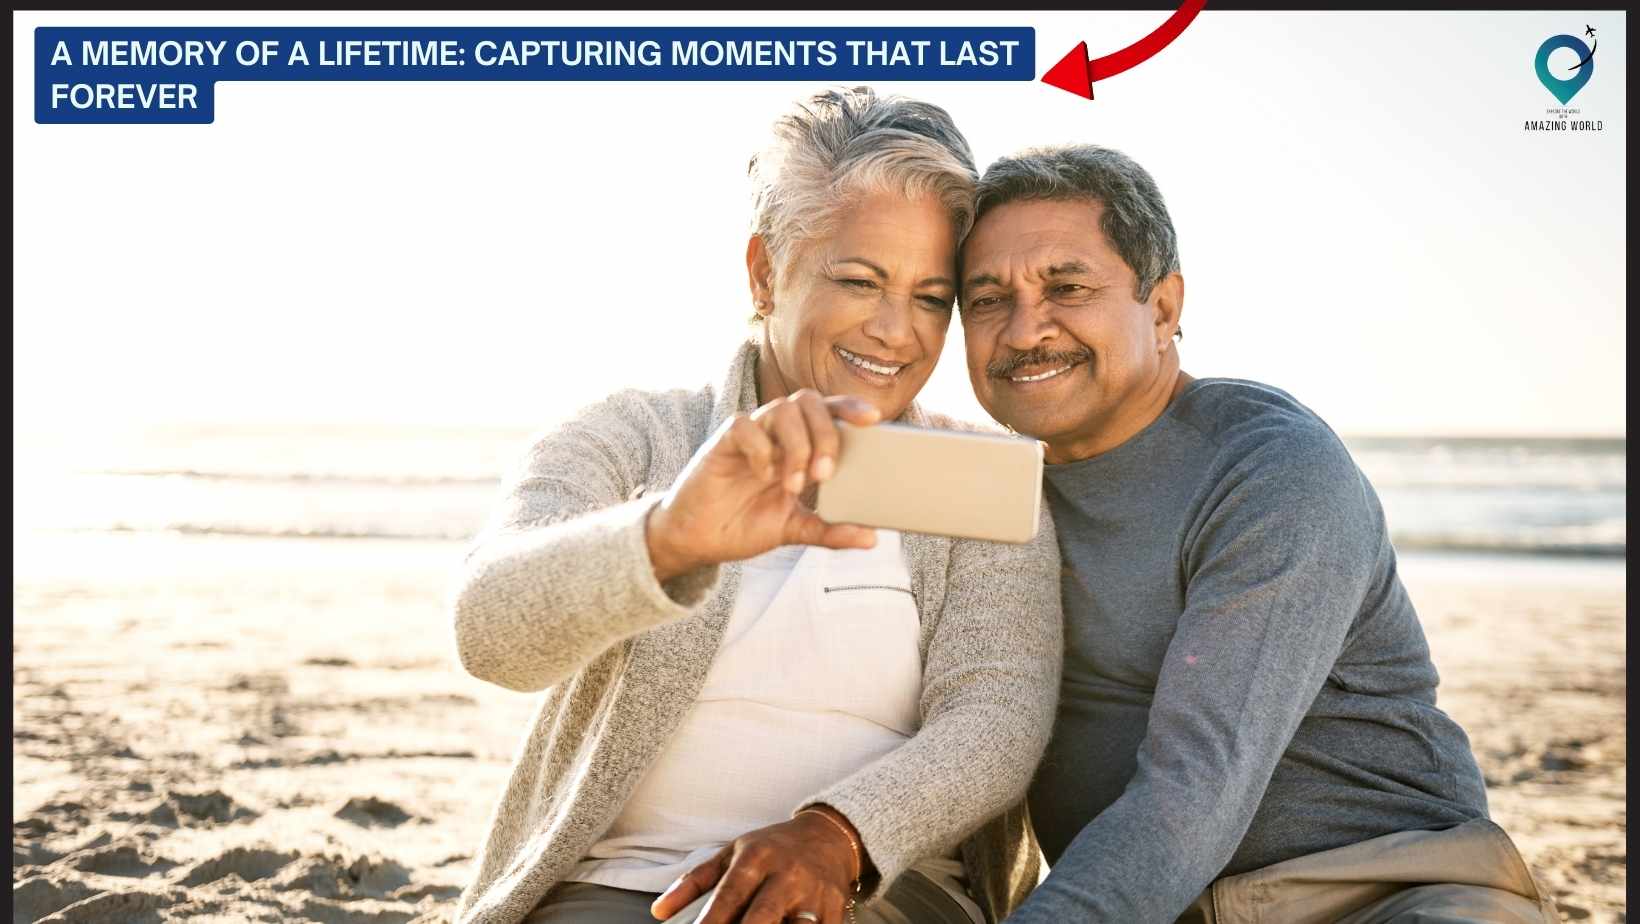 A Memory of a Lifetime: Capturing Moments That Last Forever